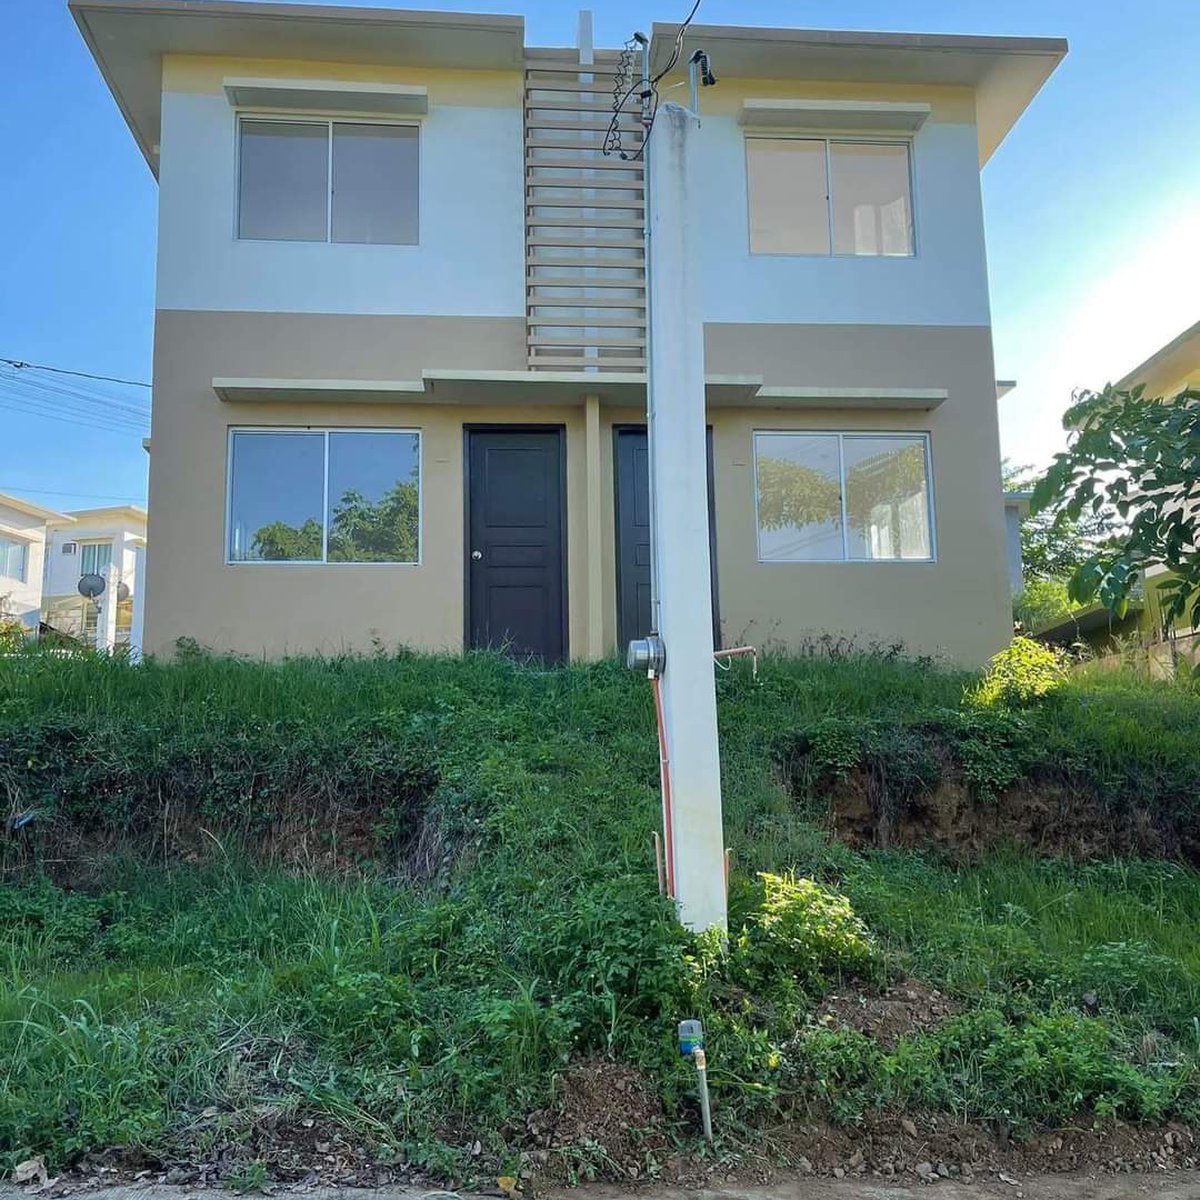 2-bedroom Duplex / Twin House For Sale in Antipolo Rizal